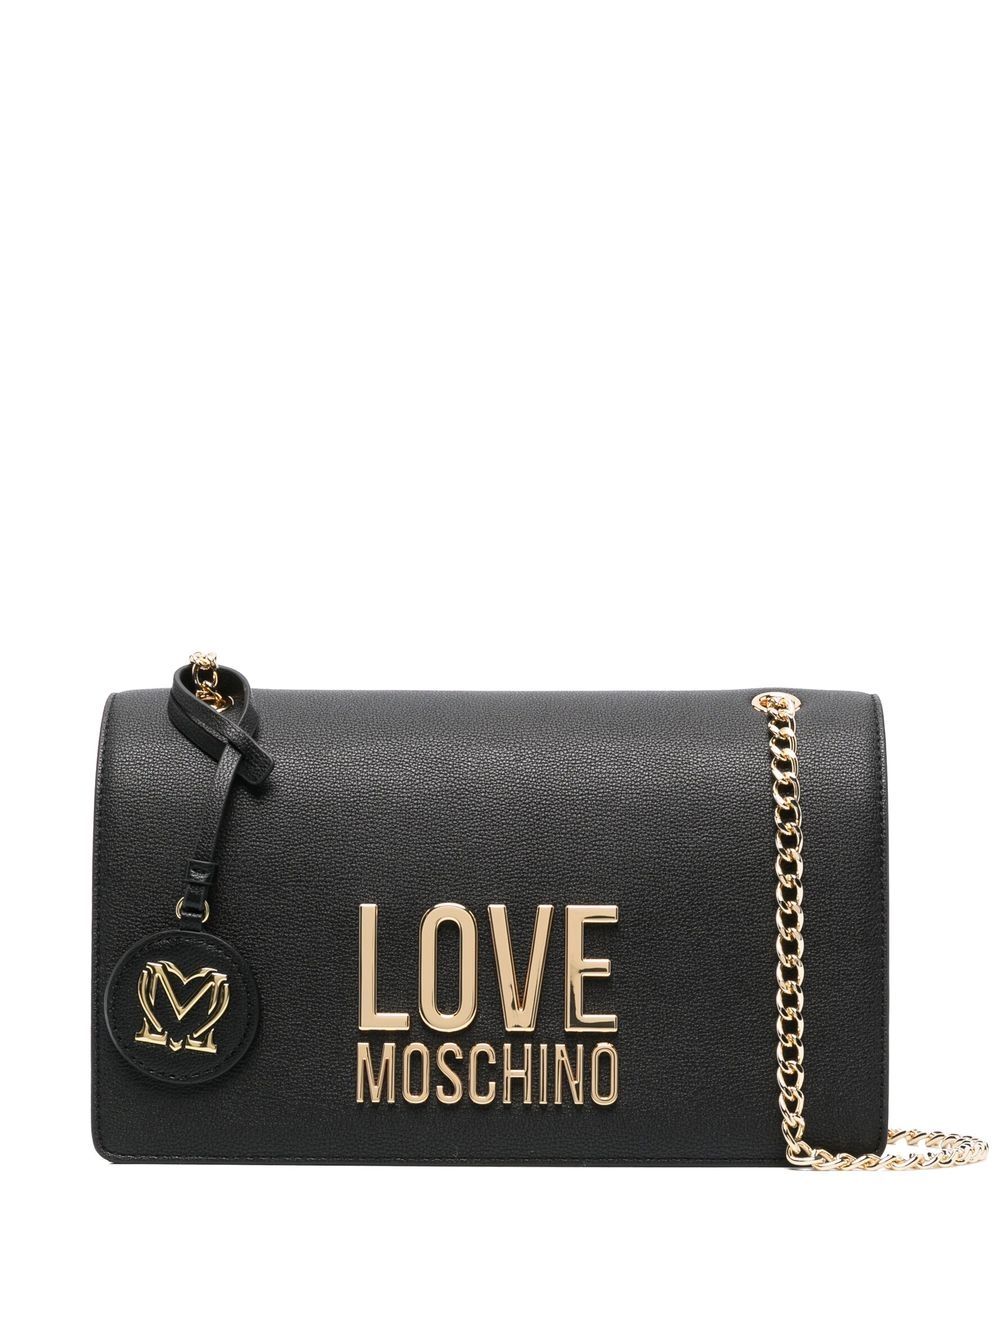 Love Moschino logo-lettering faux leather shoulder bag - Black von Love Moschino